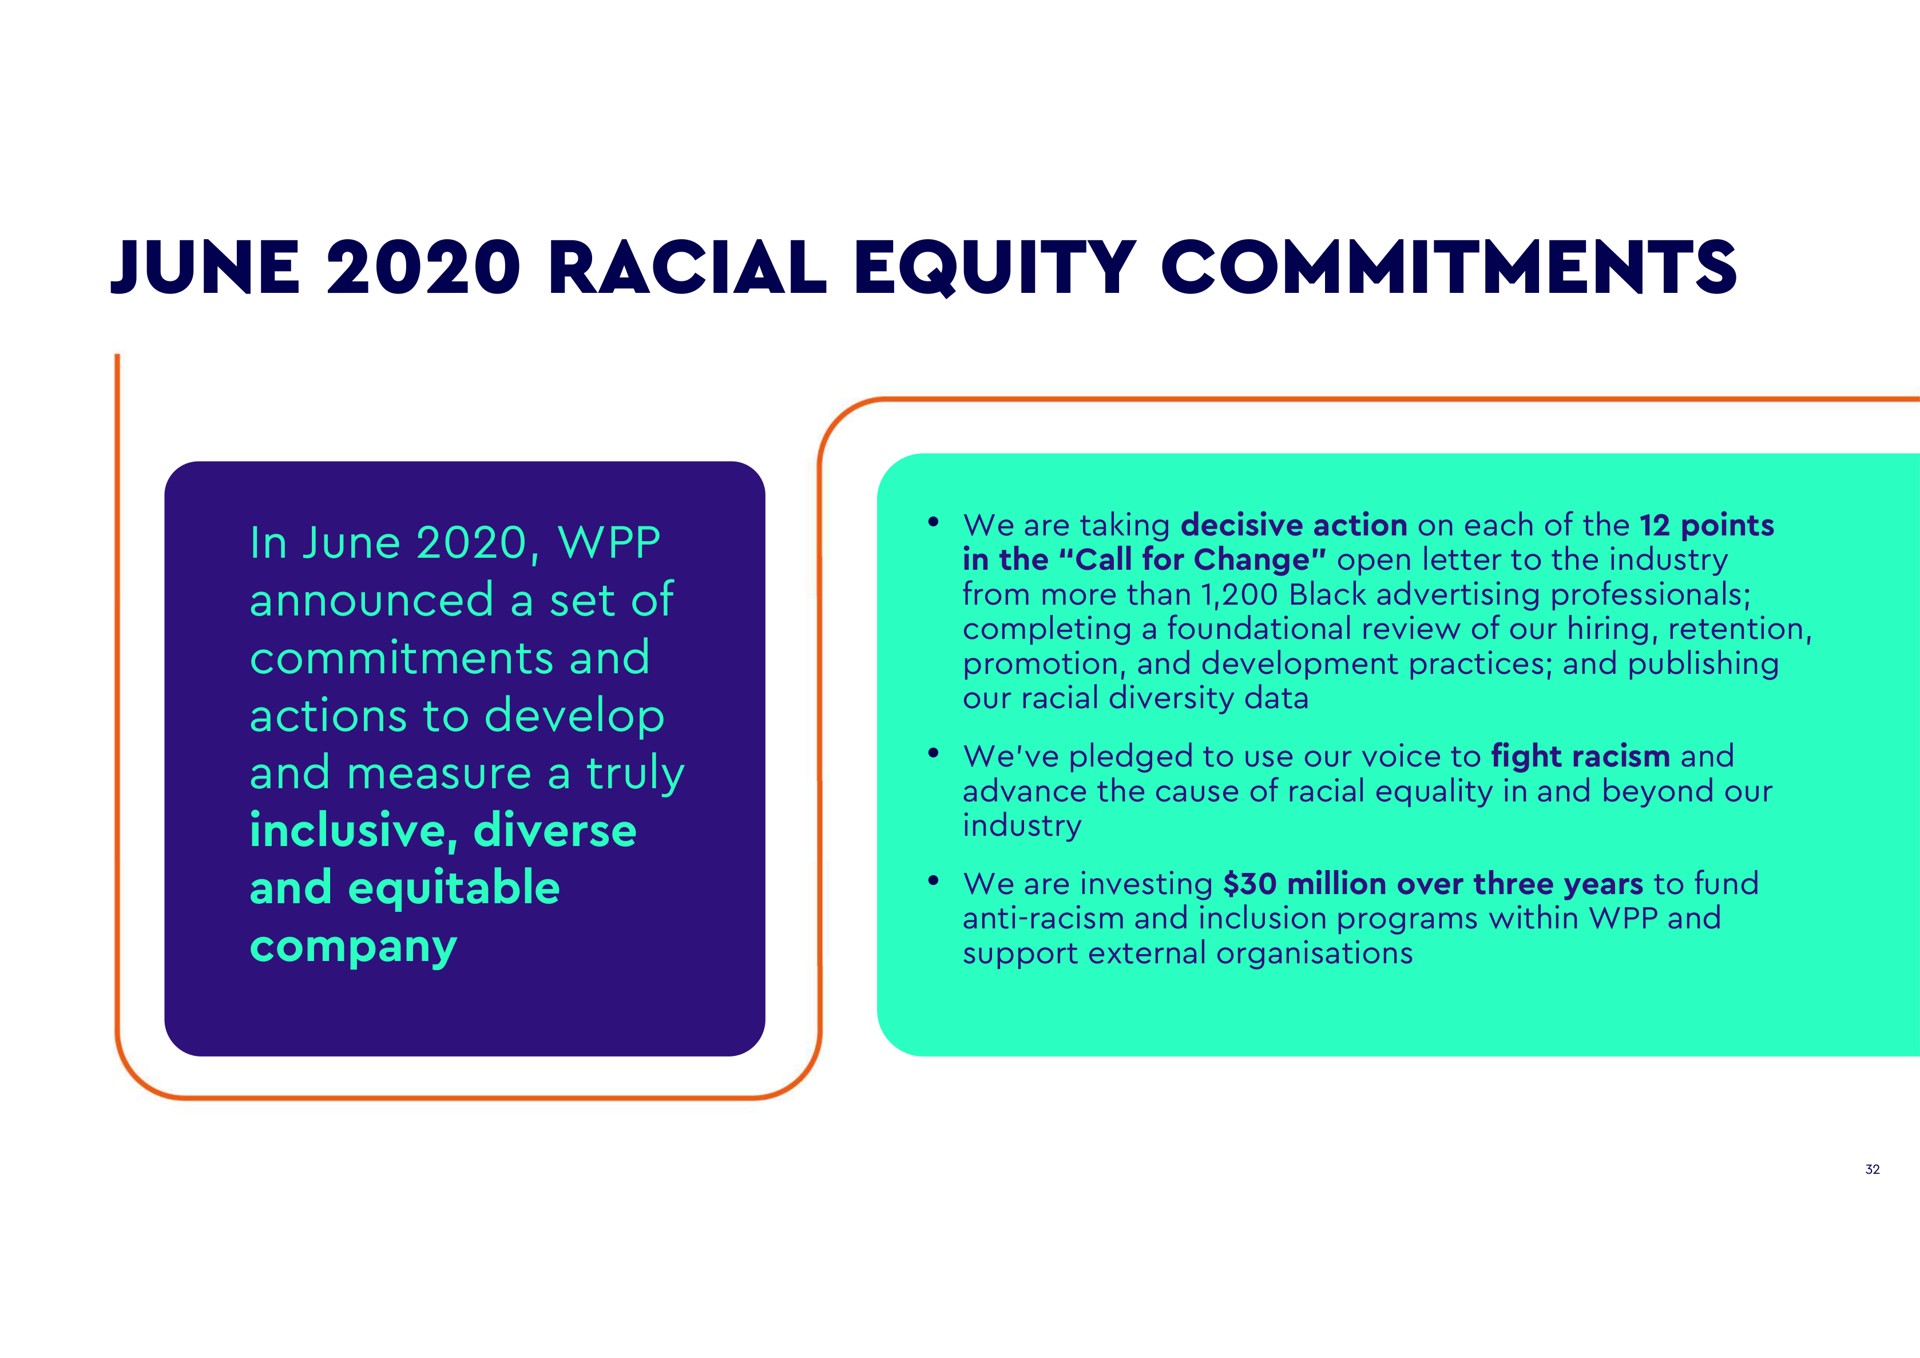 june racial equity commitments in announced a set of and actions to develop tae inclusive diverse and equitable company taking decisive action on each of the points in the call for change open letter to the industry from more than black advertising professionals completing a foundational review of our hiring retention promotion and development practices and publishing our diversity data we pledged to use our voice to fight racism and advance the cause of equality in and beyond our industry investing million over three years to fund anti racism and inclusion programs within and support external | WPP